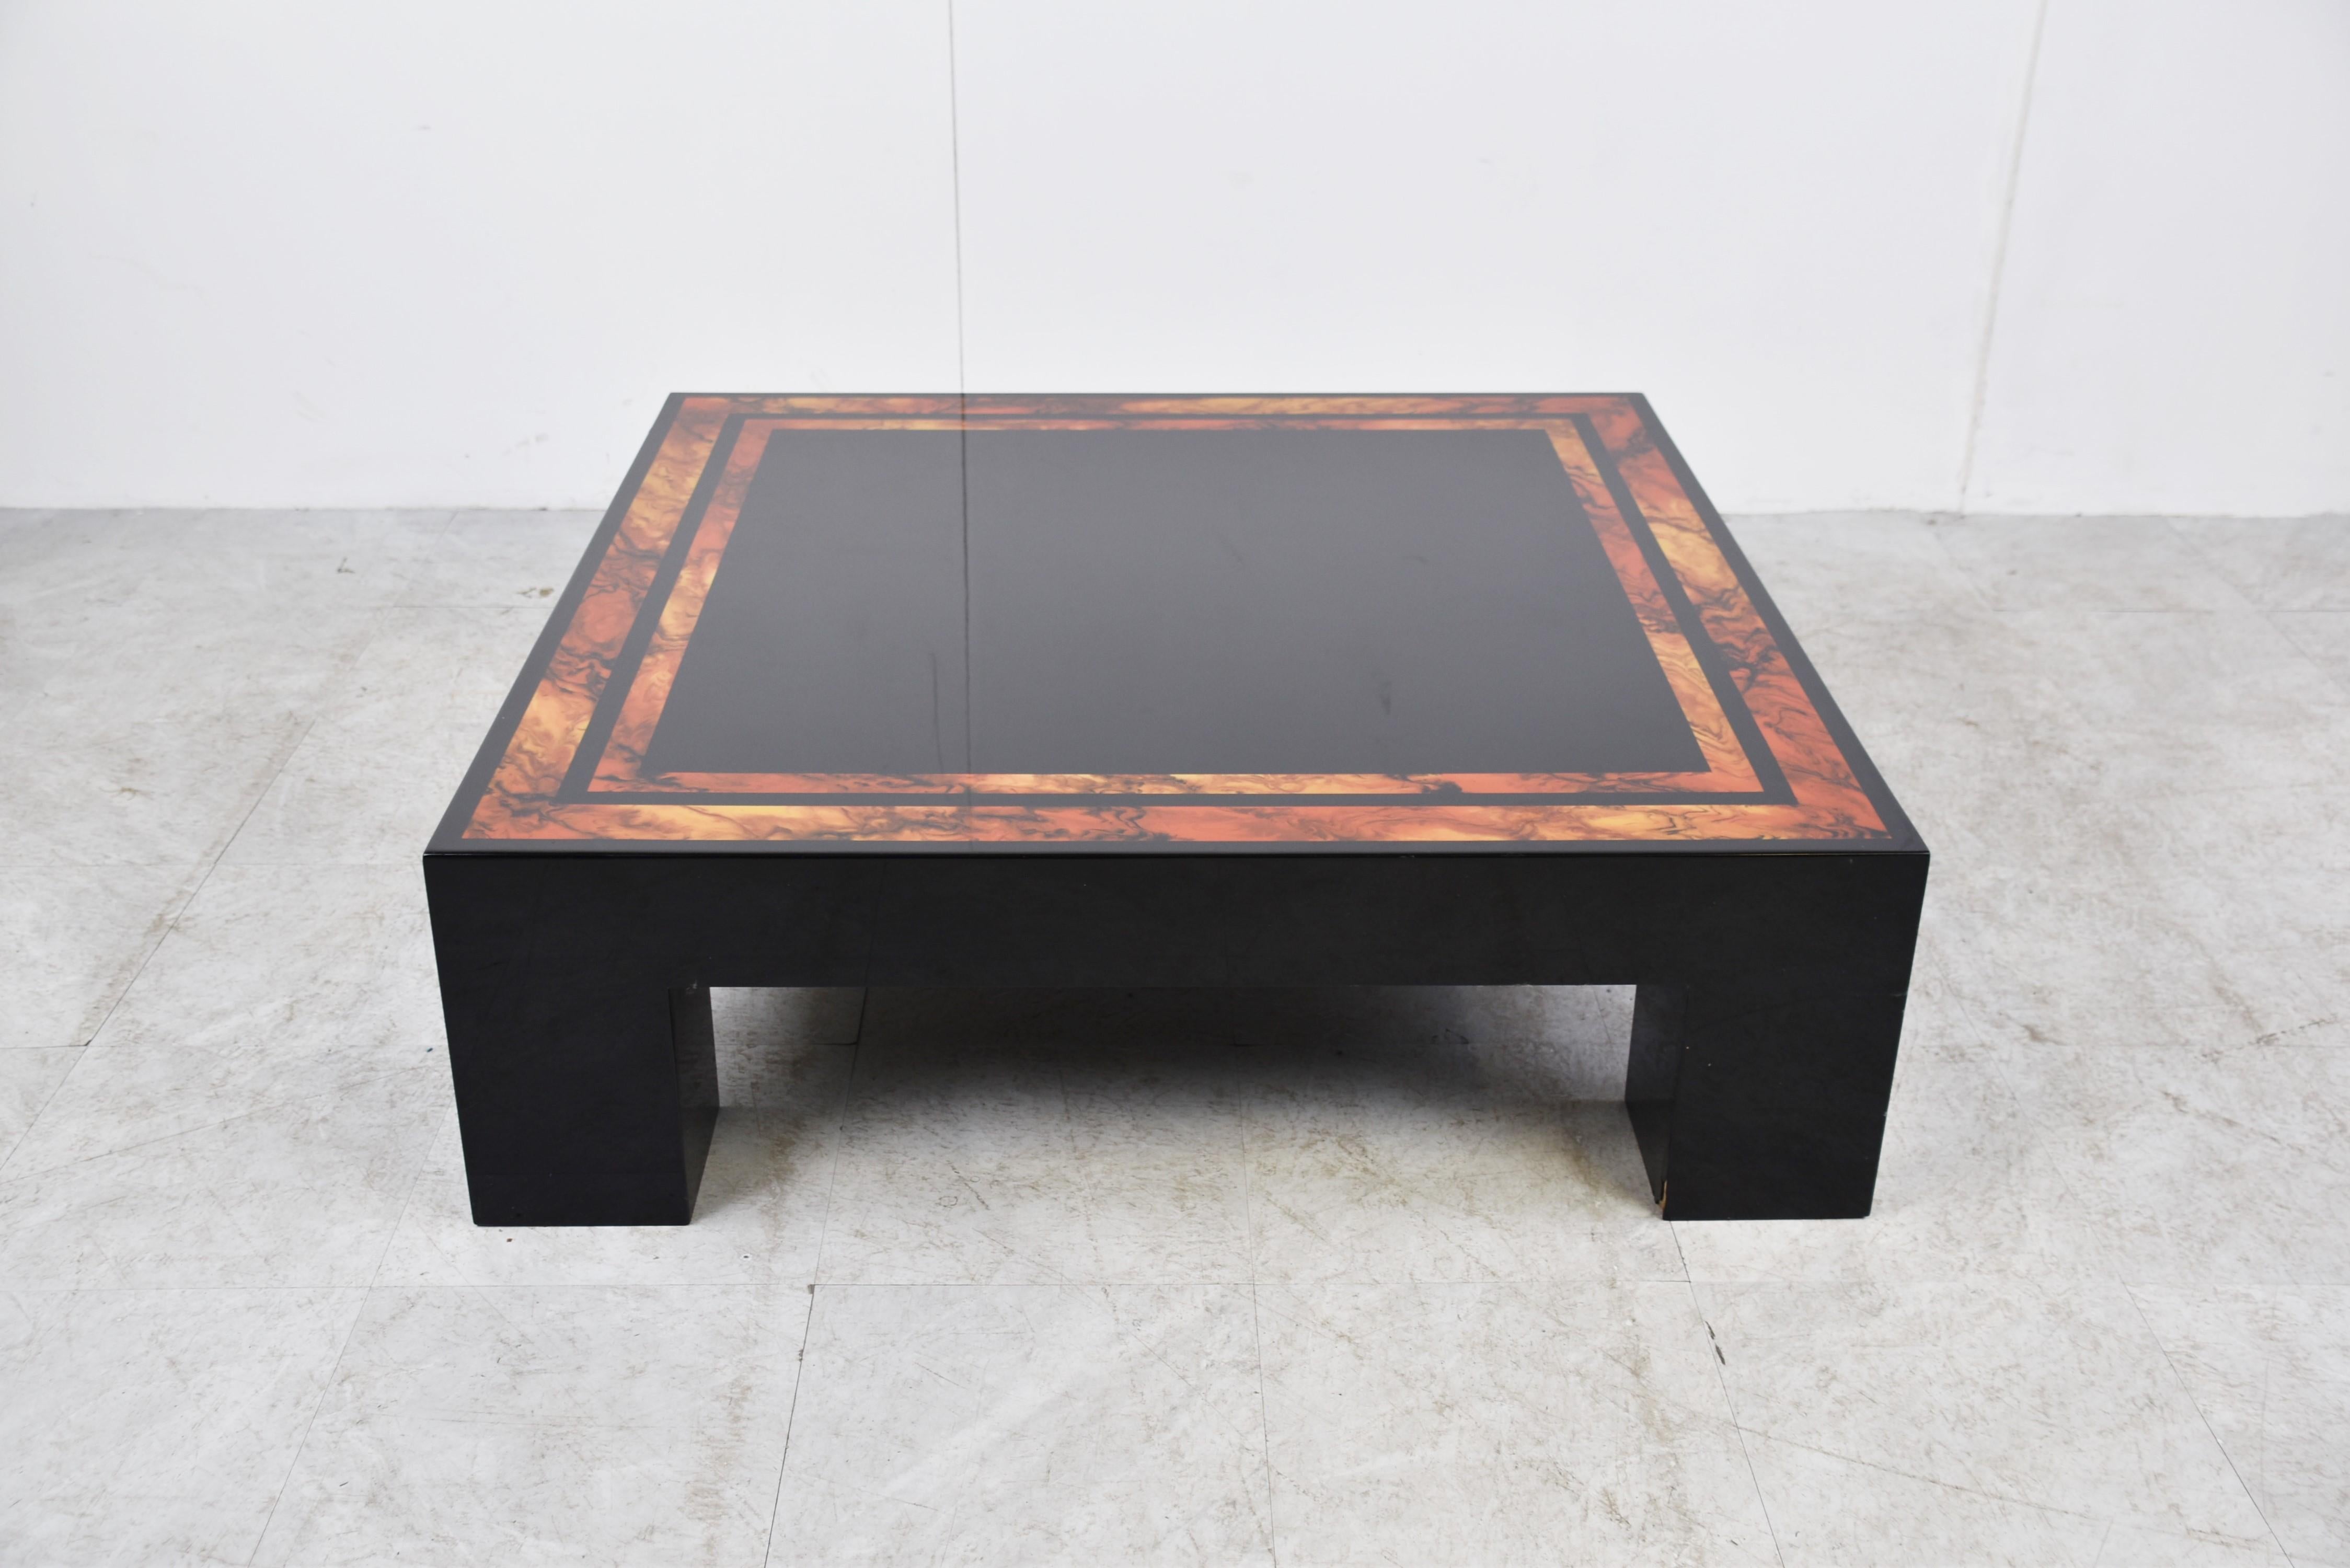 Elegant square burl wood and lacquer coffee table.

Very lovely seventies/eighties glam look thanks to the burl veneer.

Condition: Good with normal wear.

Dimensions:
Height: 31cm/12.20